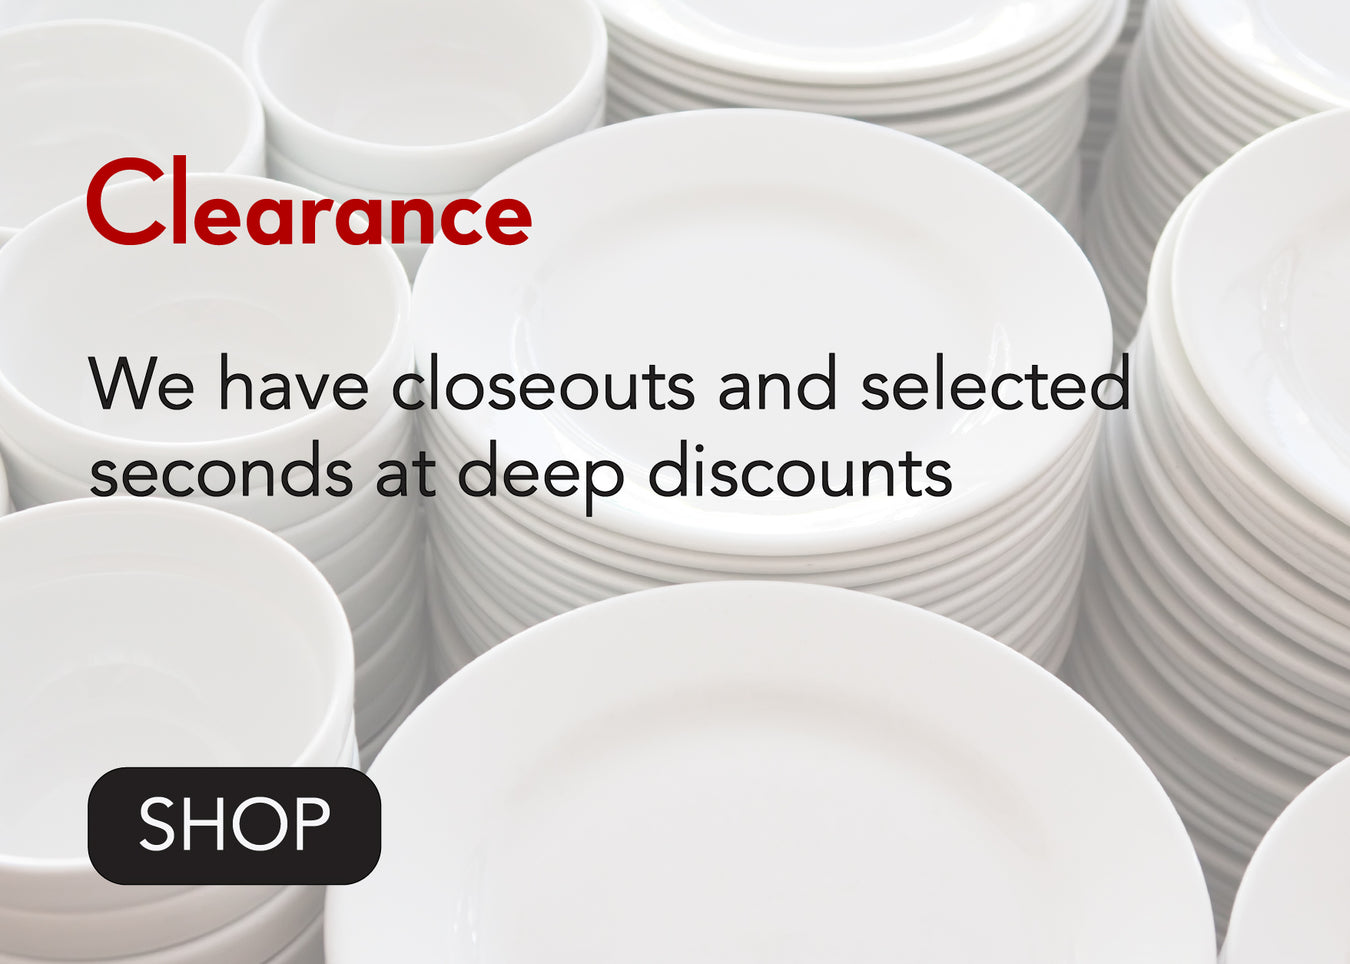 Clearance  We have closeouts and selected seconds at deep discounts Shop button